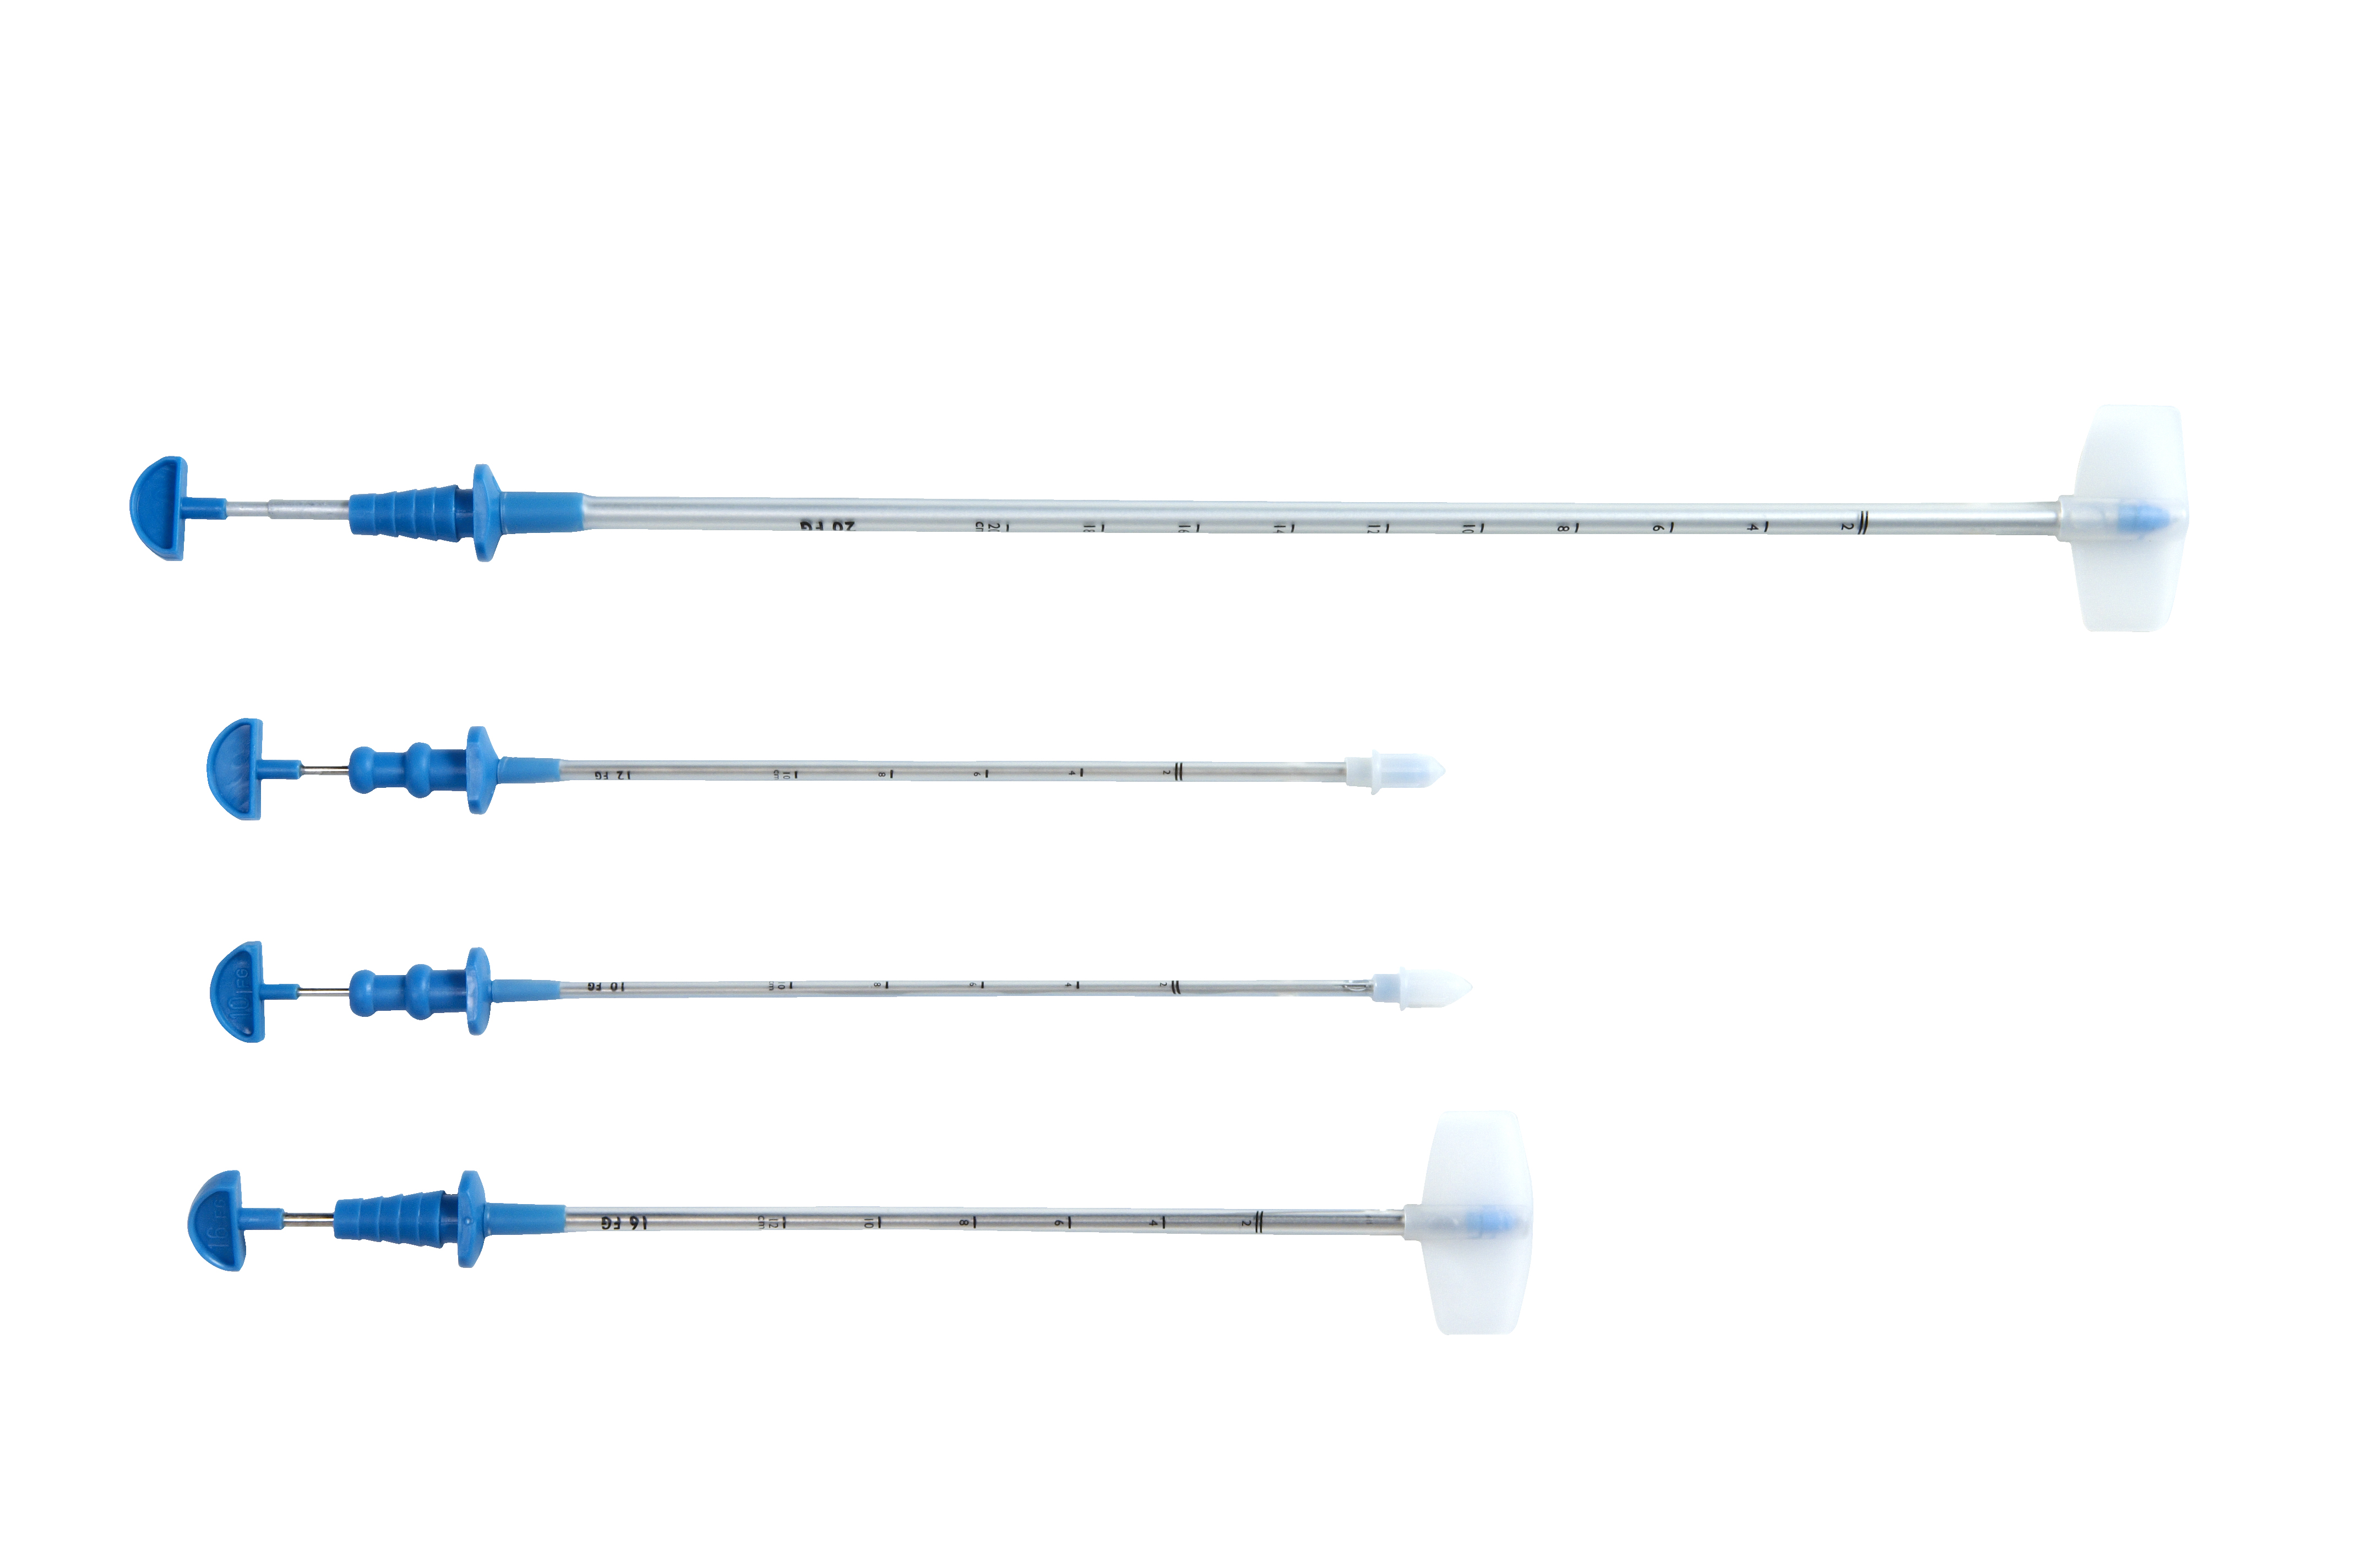 KRUUSE thoracic catheter with trocar, 20 FG, sterile